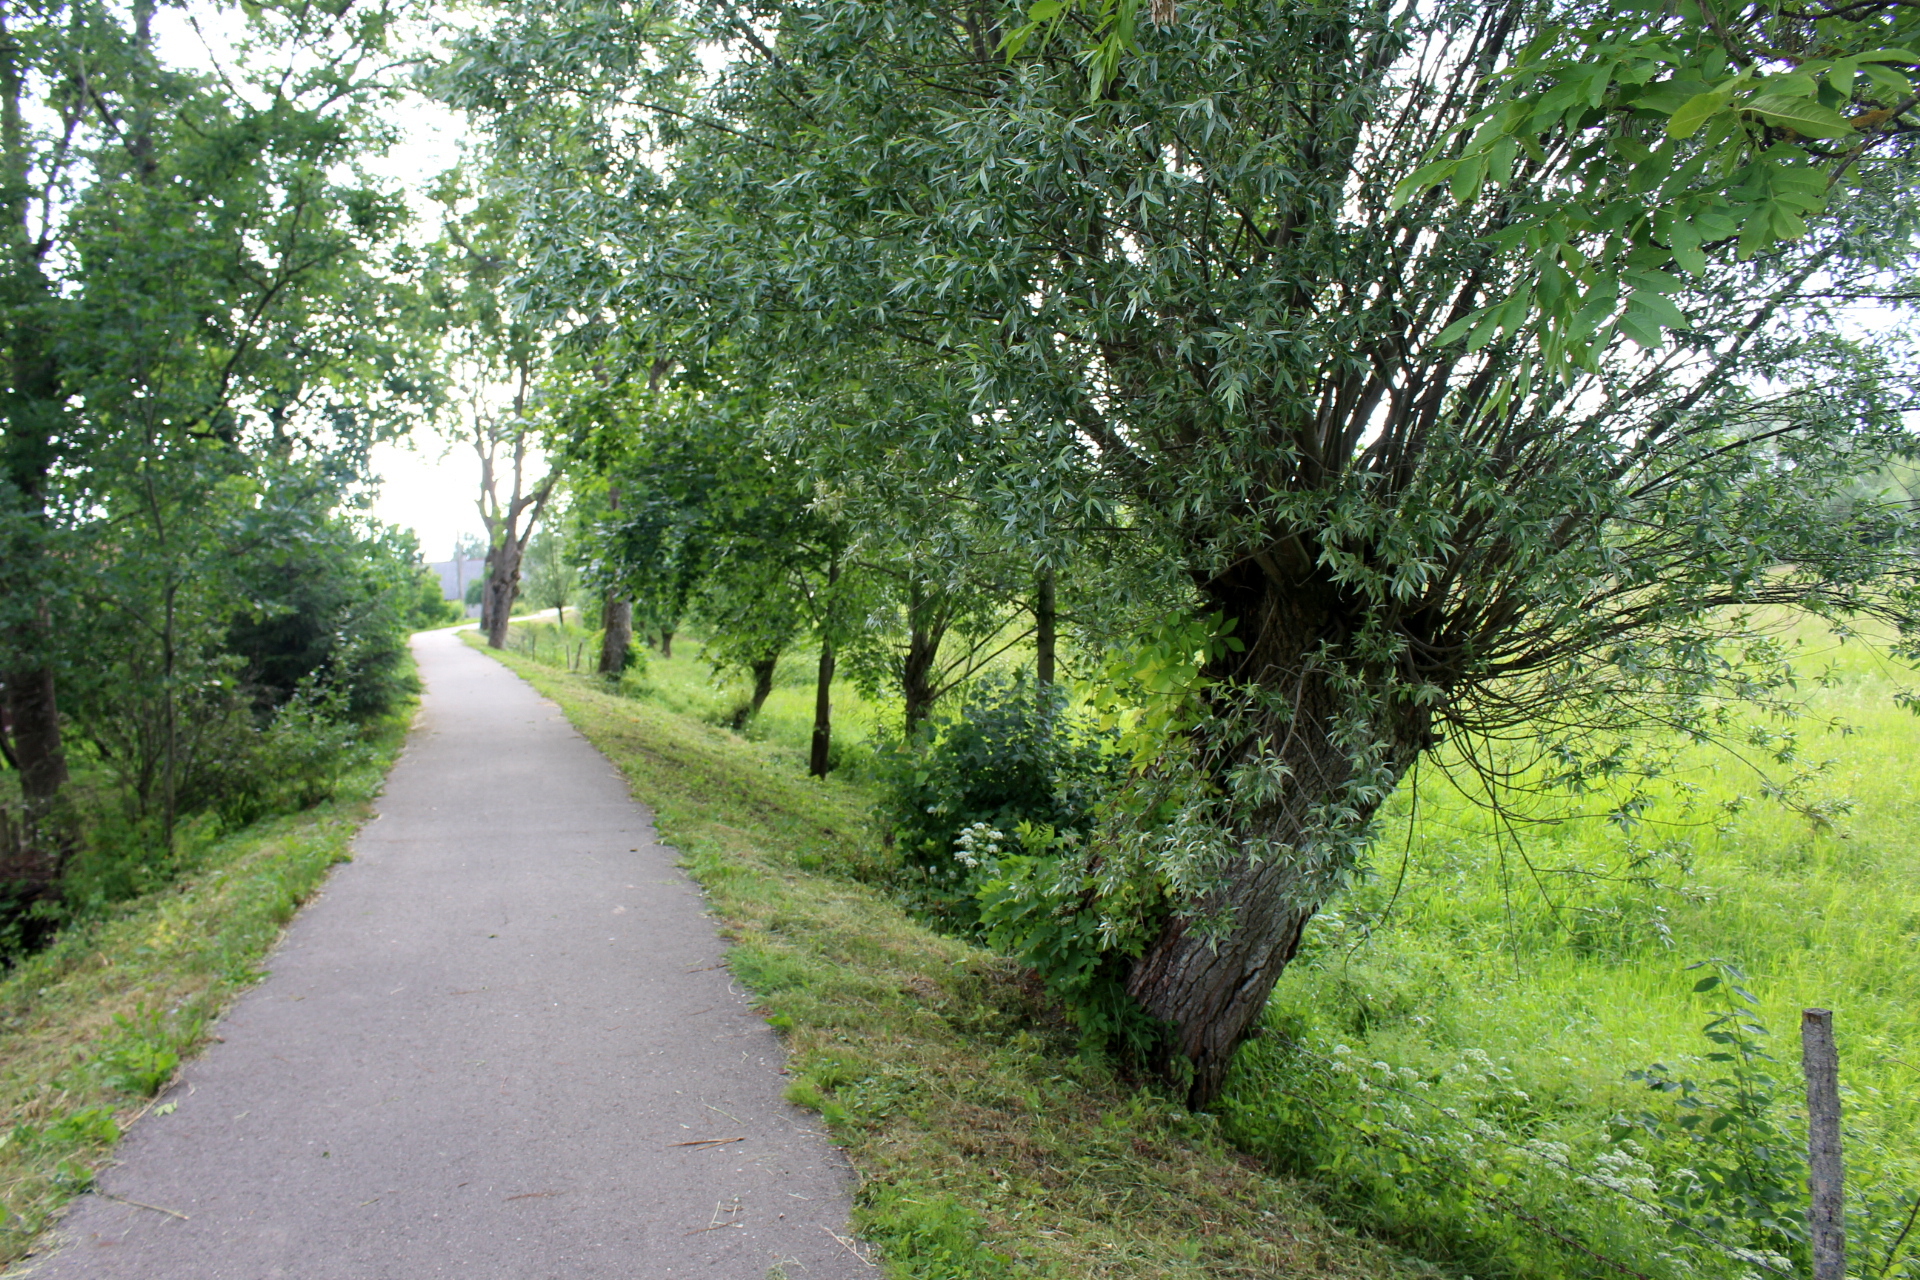 the bike path is located among a grove of trees